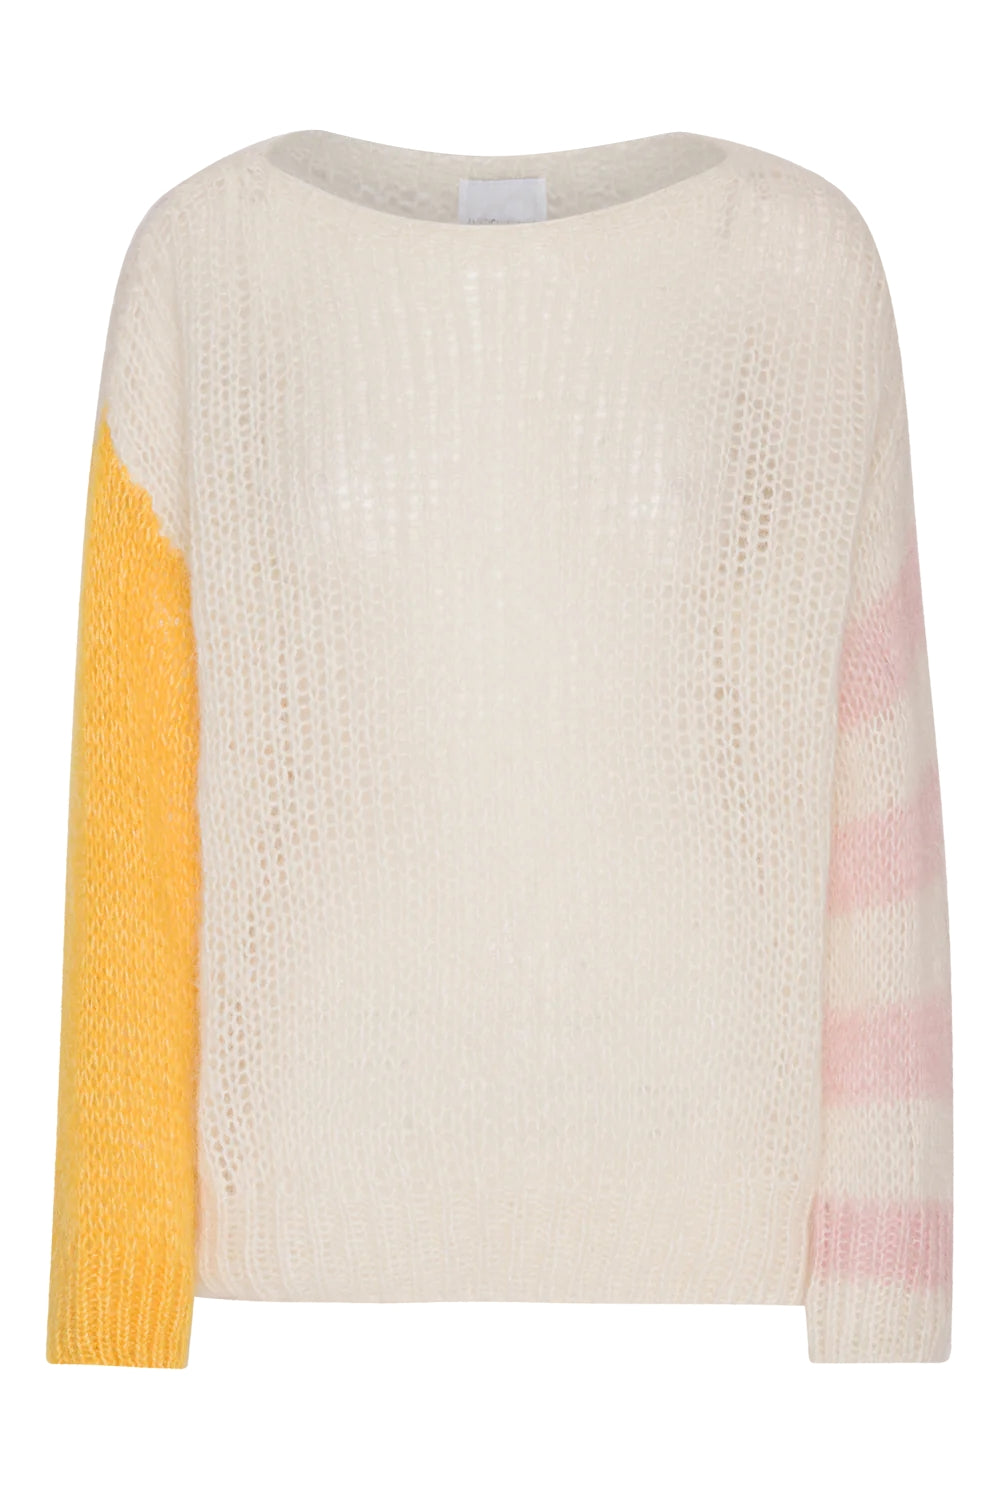 American Dreams | Amira Knit Pullover | White Yellow Light Pink Striped